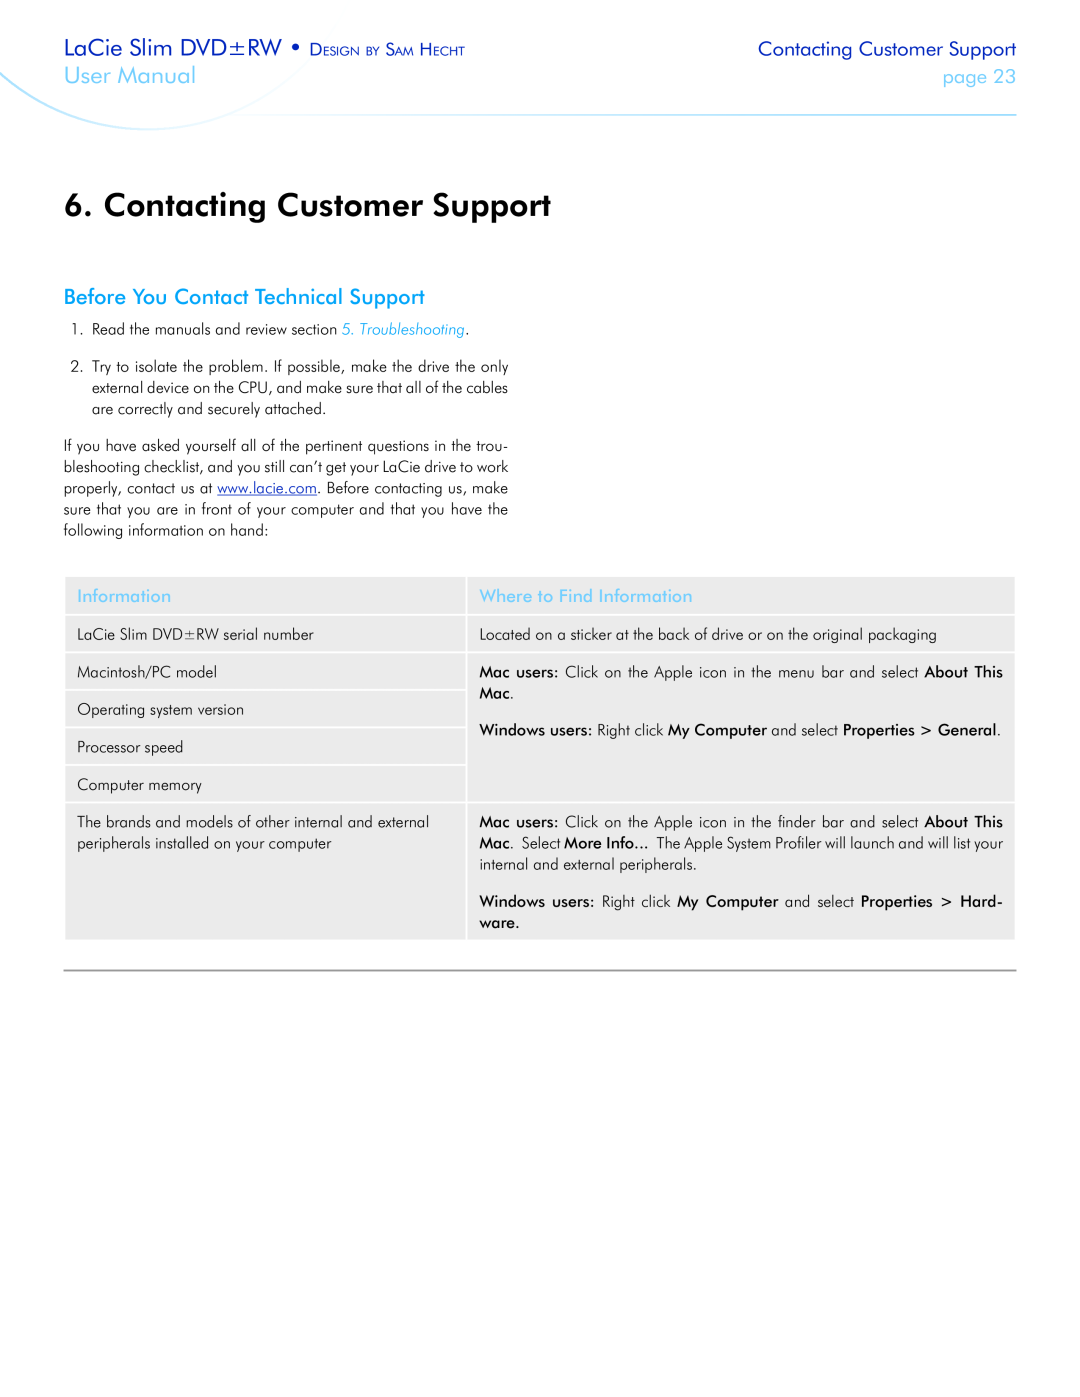 LaCie 301910 Contacting Customer Support, Before You Contact Technical Support, Where to Find Information, User Manual 